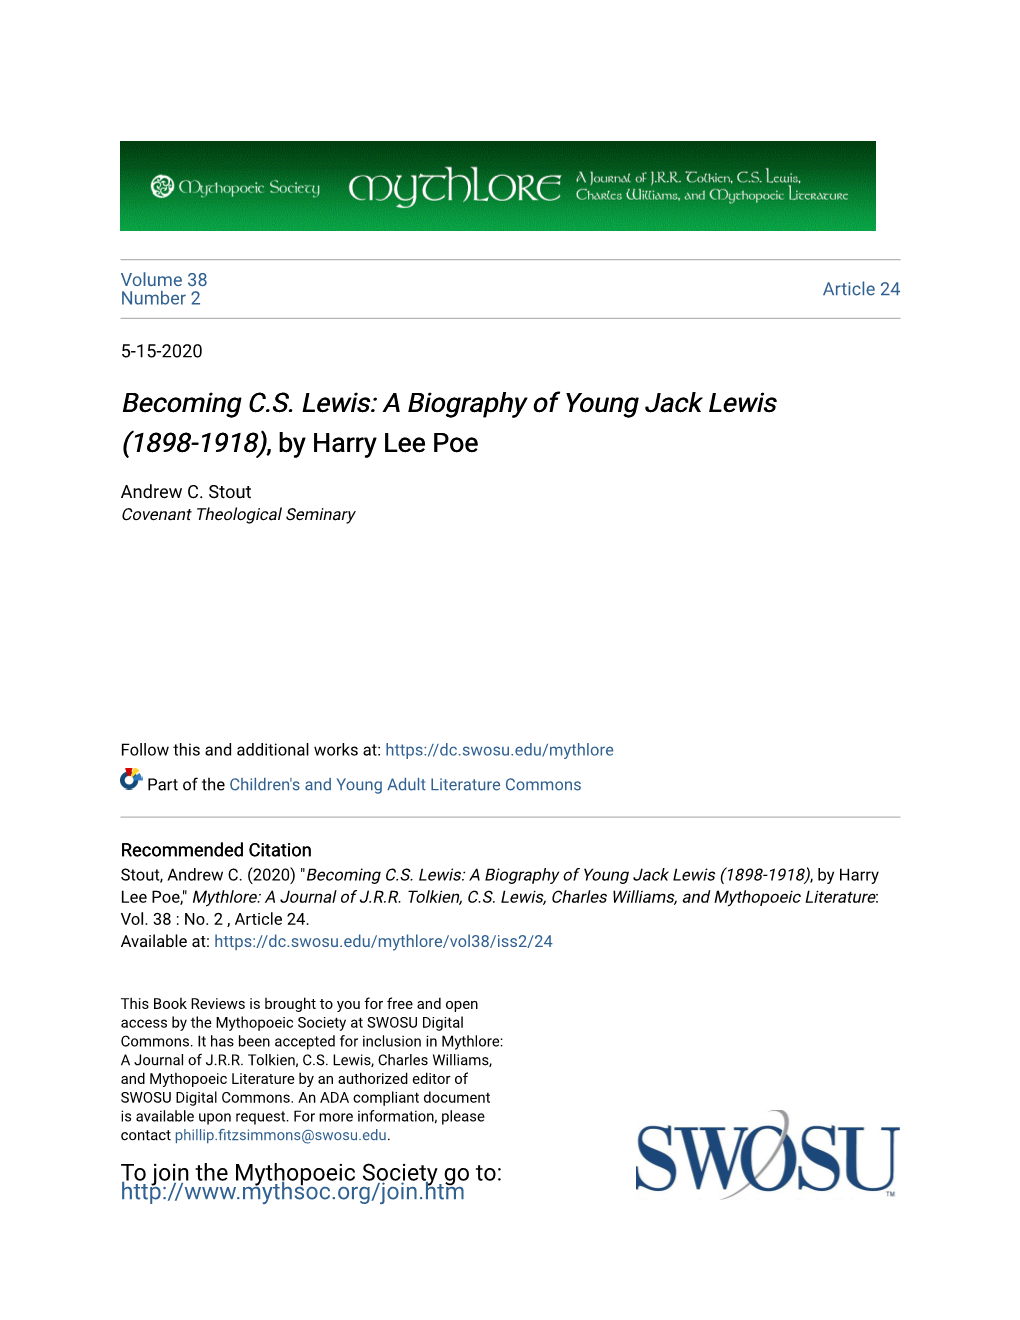 Becoming C.S. Lewis: a Biography of Young Jack Lewis (1898-1918), by Harry Lee Poe